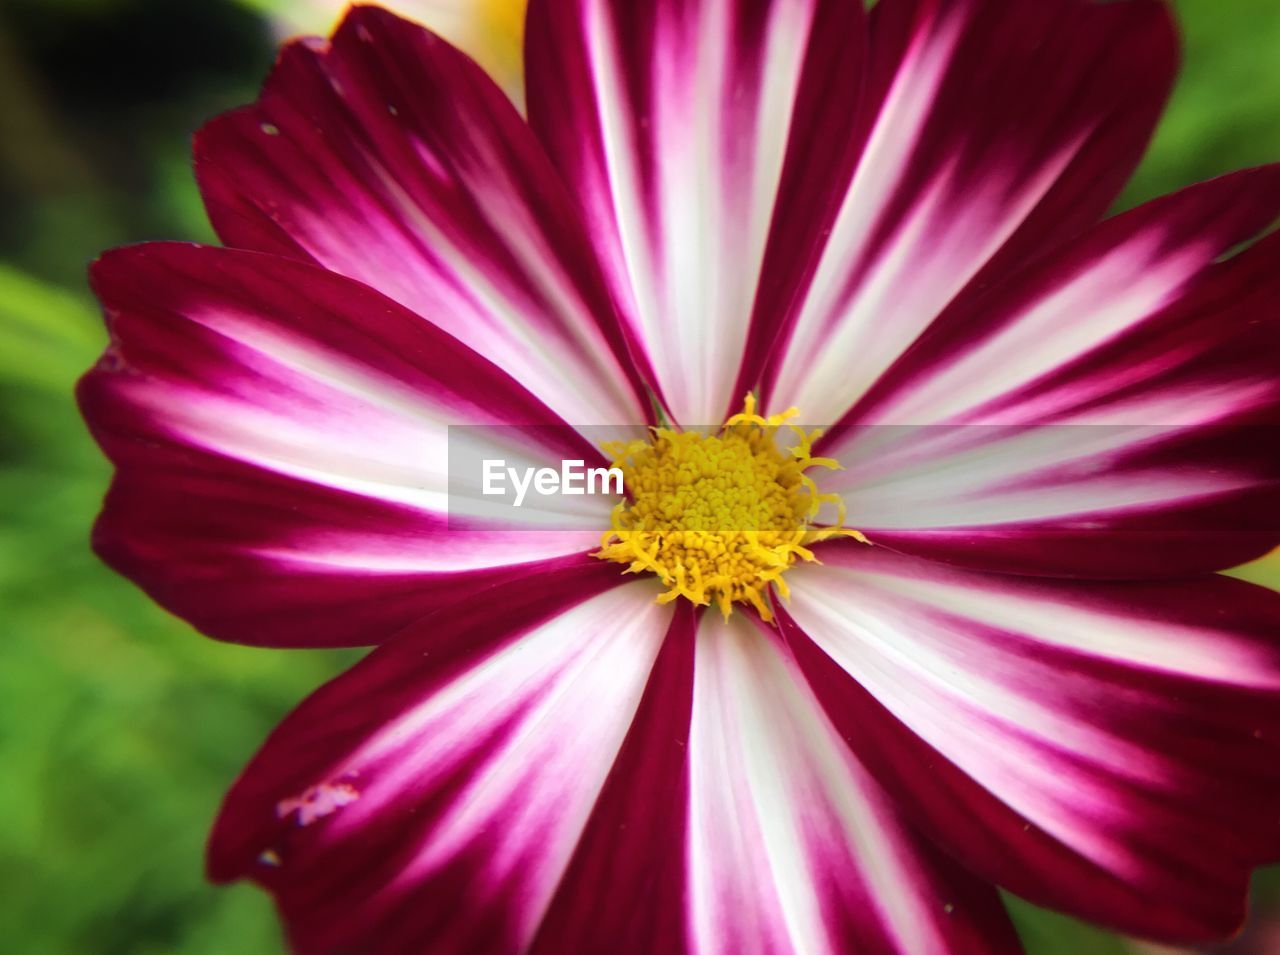 CLOSE-UP OF COSMOS FLOWER